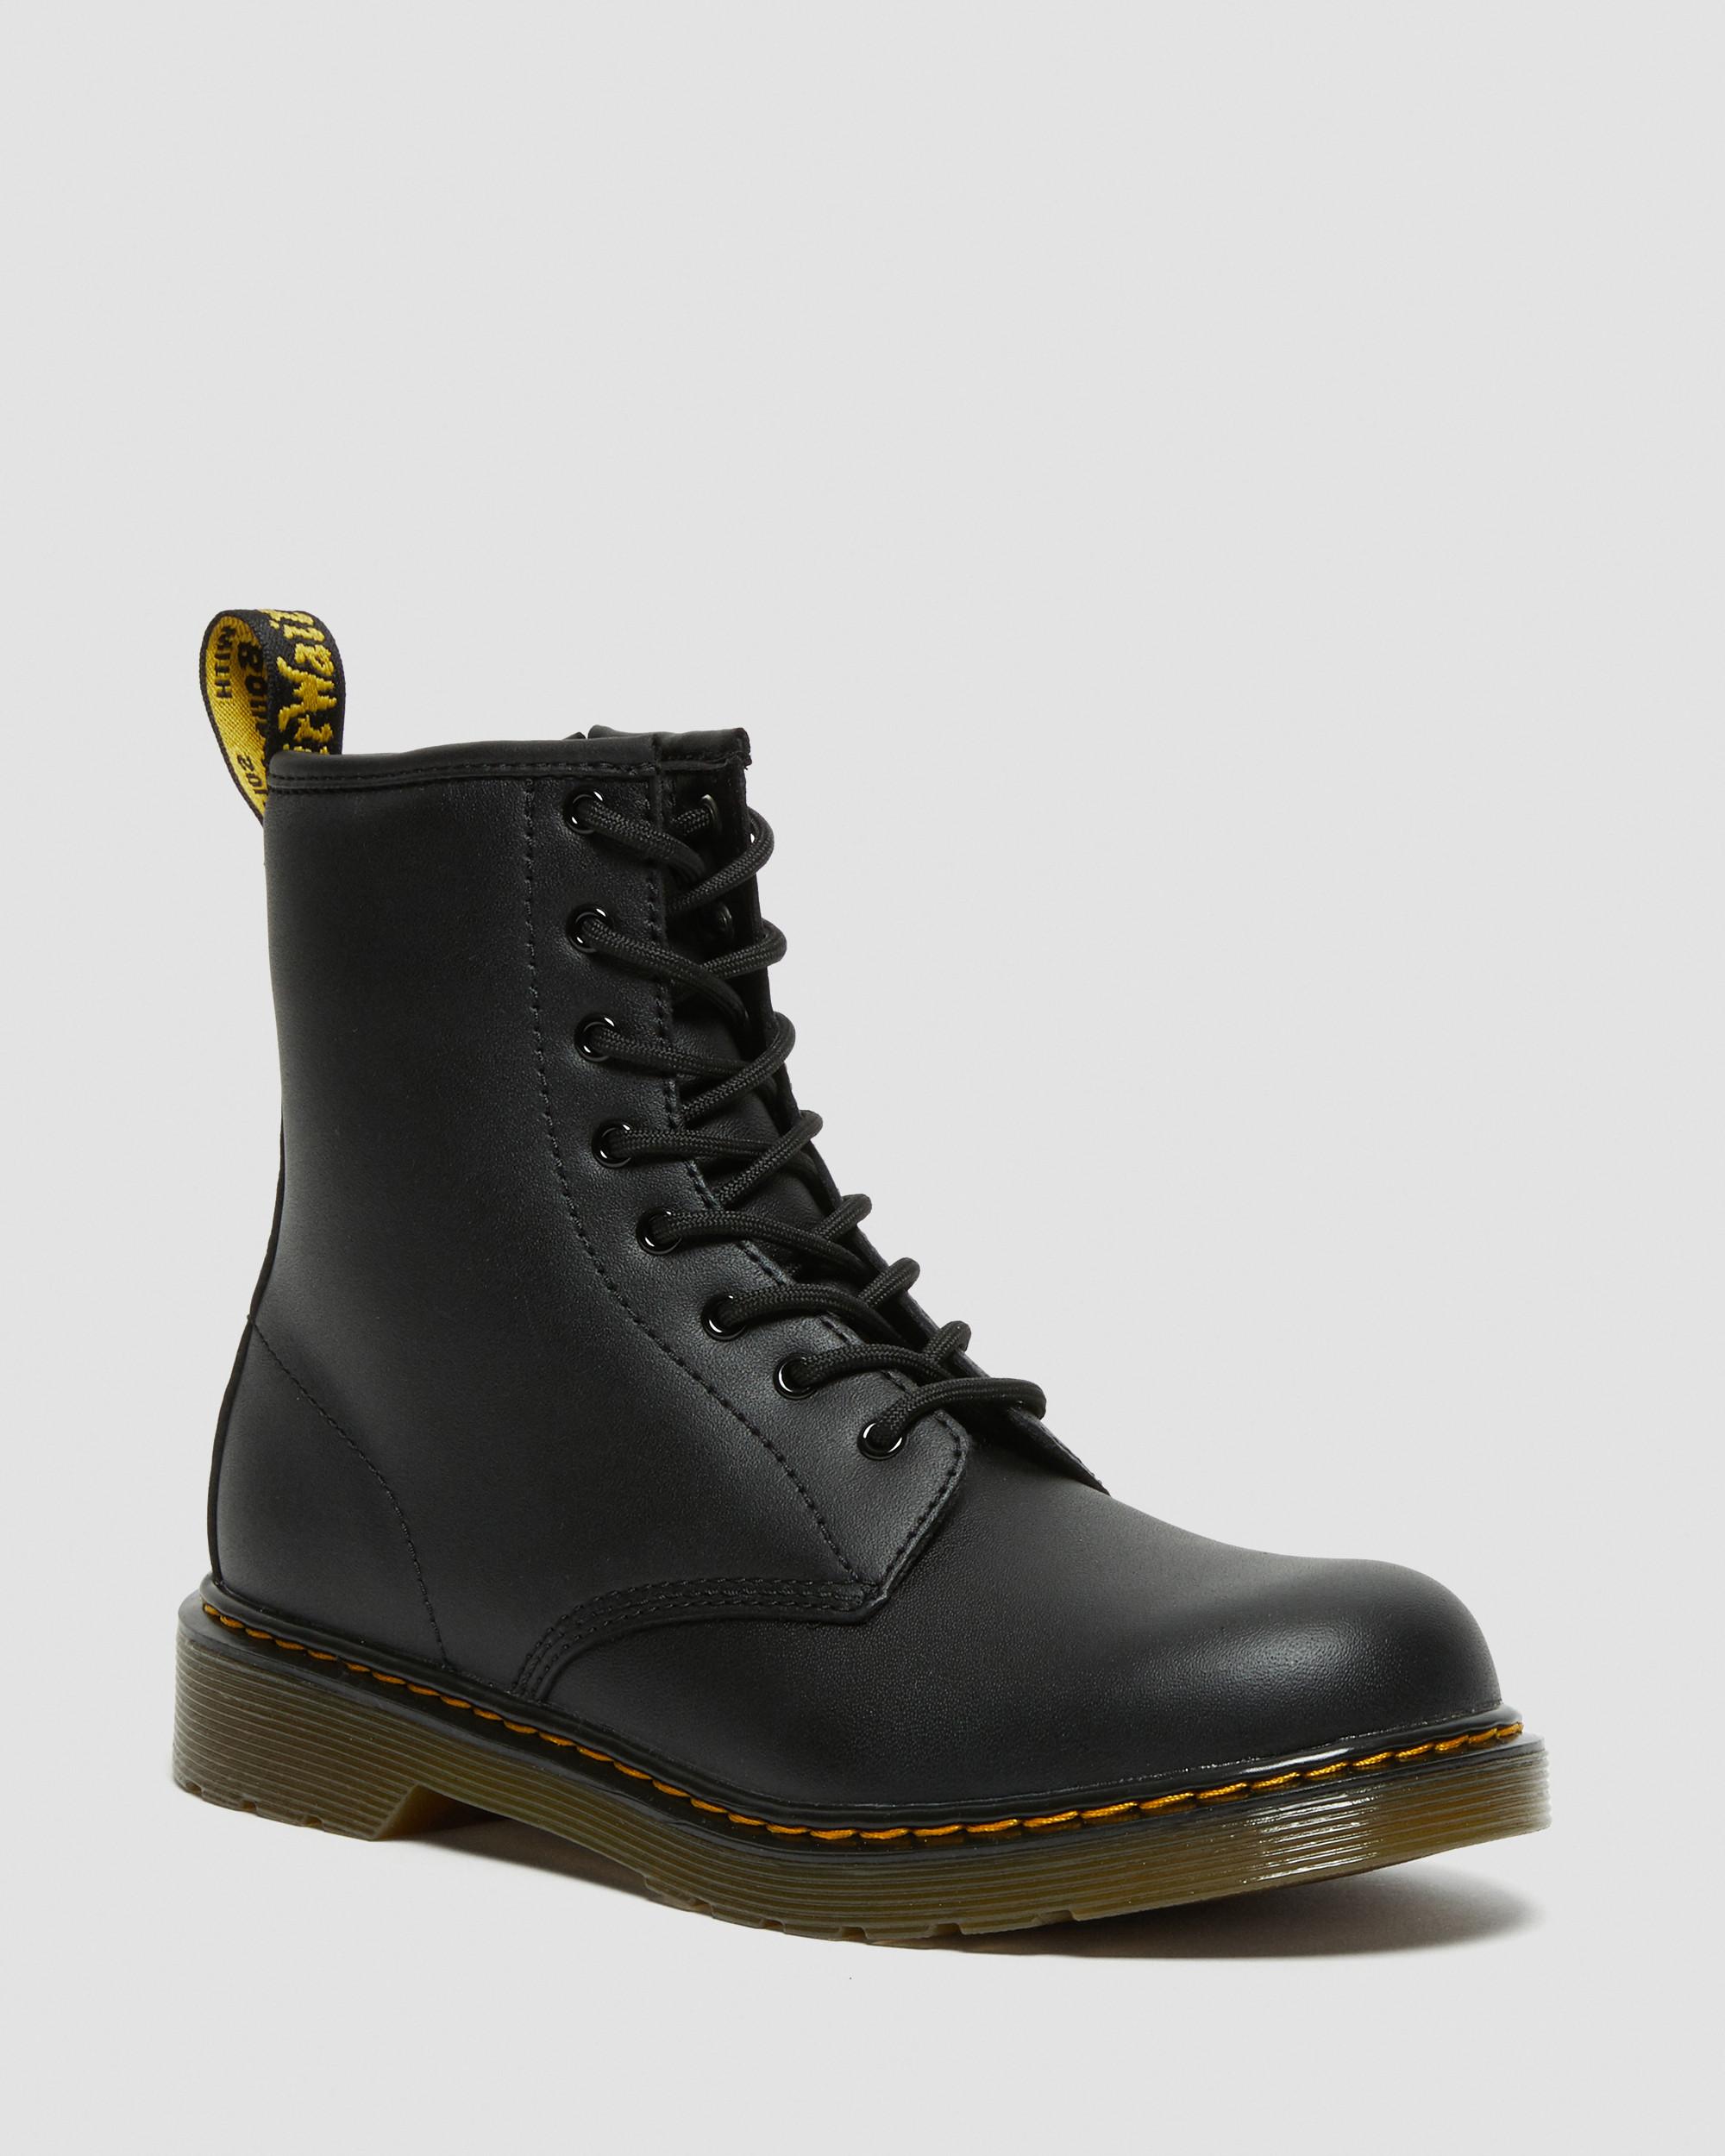 YOUTH 1460 SOFTY T | Dr. Martens UK